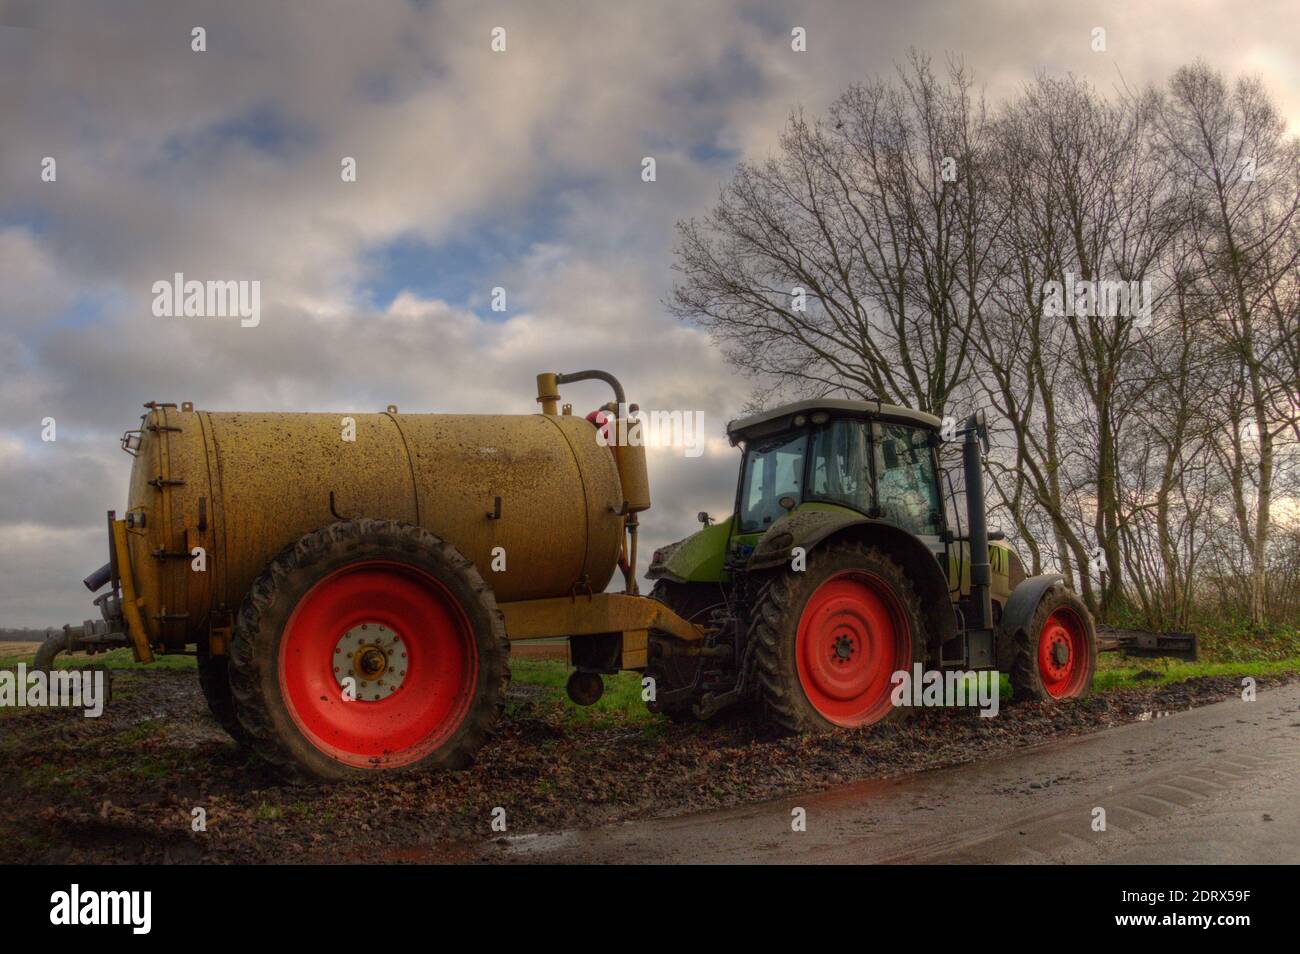 Yellow slurry tanker and green tractor with red wheels in mud under blue sky with clouds Stock Photo